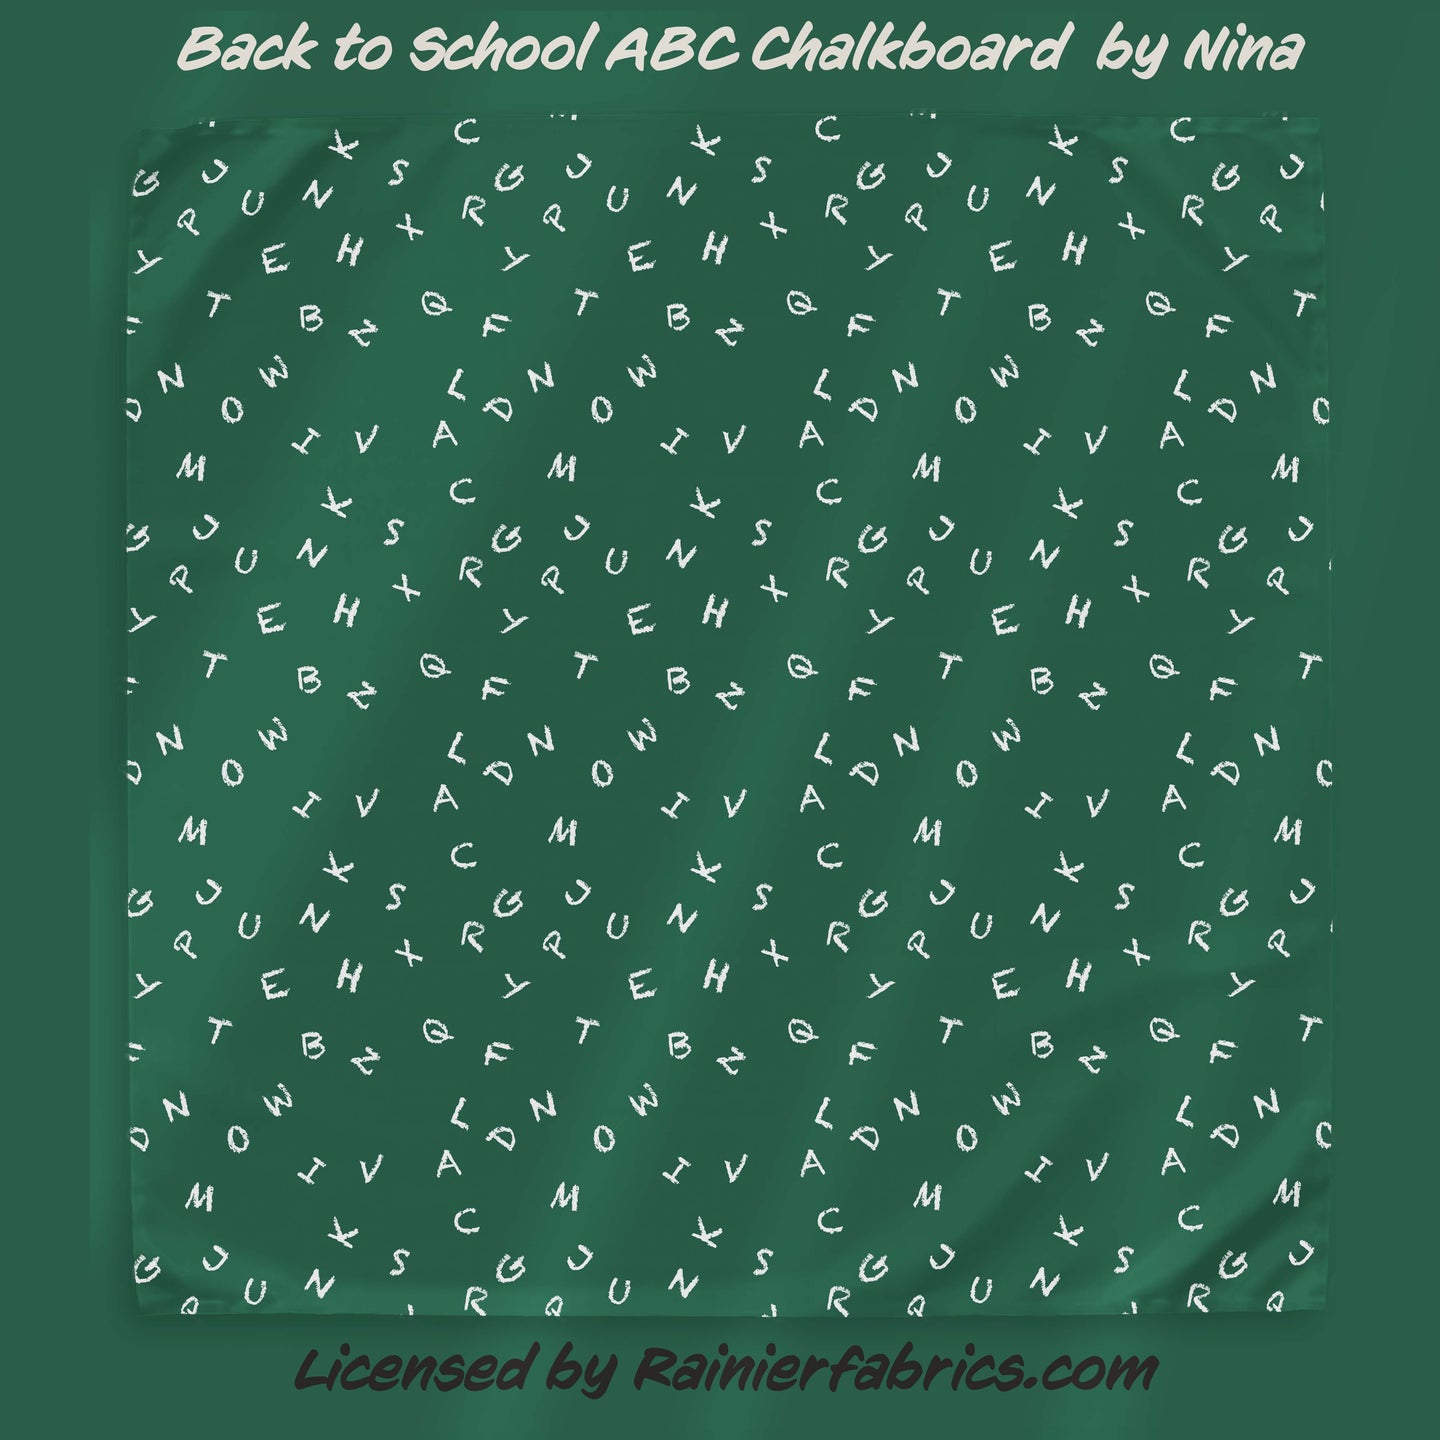 Back to School - ABC Chalkboard by Nina - Rainier Fabrics Exclusive! - 2-5 day TAT - Order by 1/2 yard; Blankets and towels available too